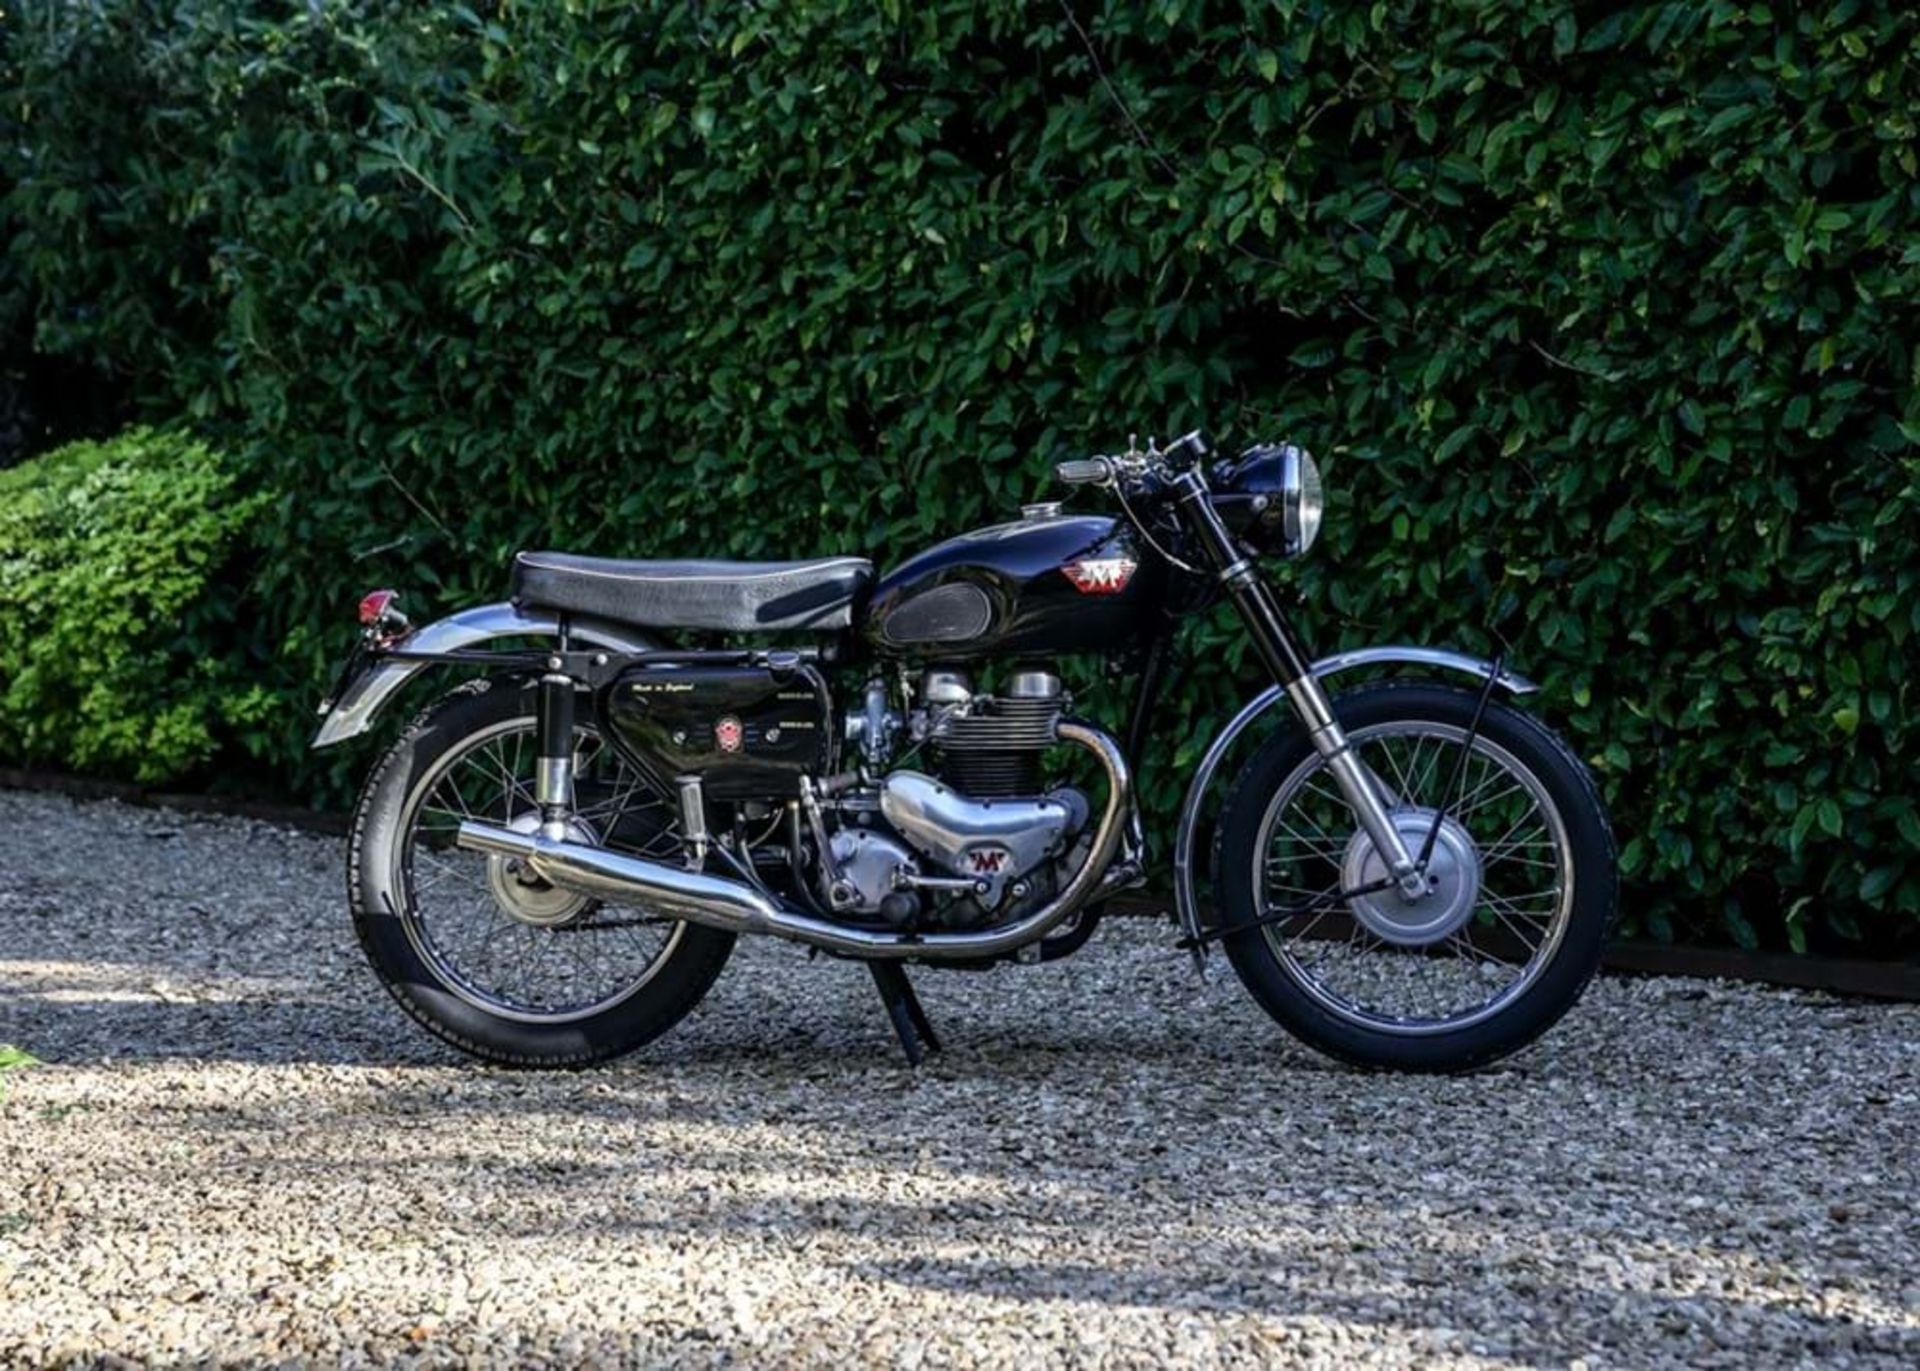 1961 Matchless G12 CSR (650cc) *WITHDRAWN* - Image 2 of 10